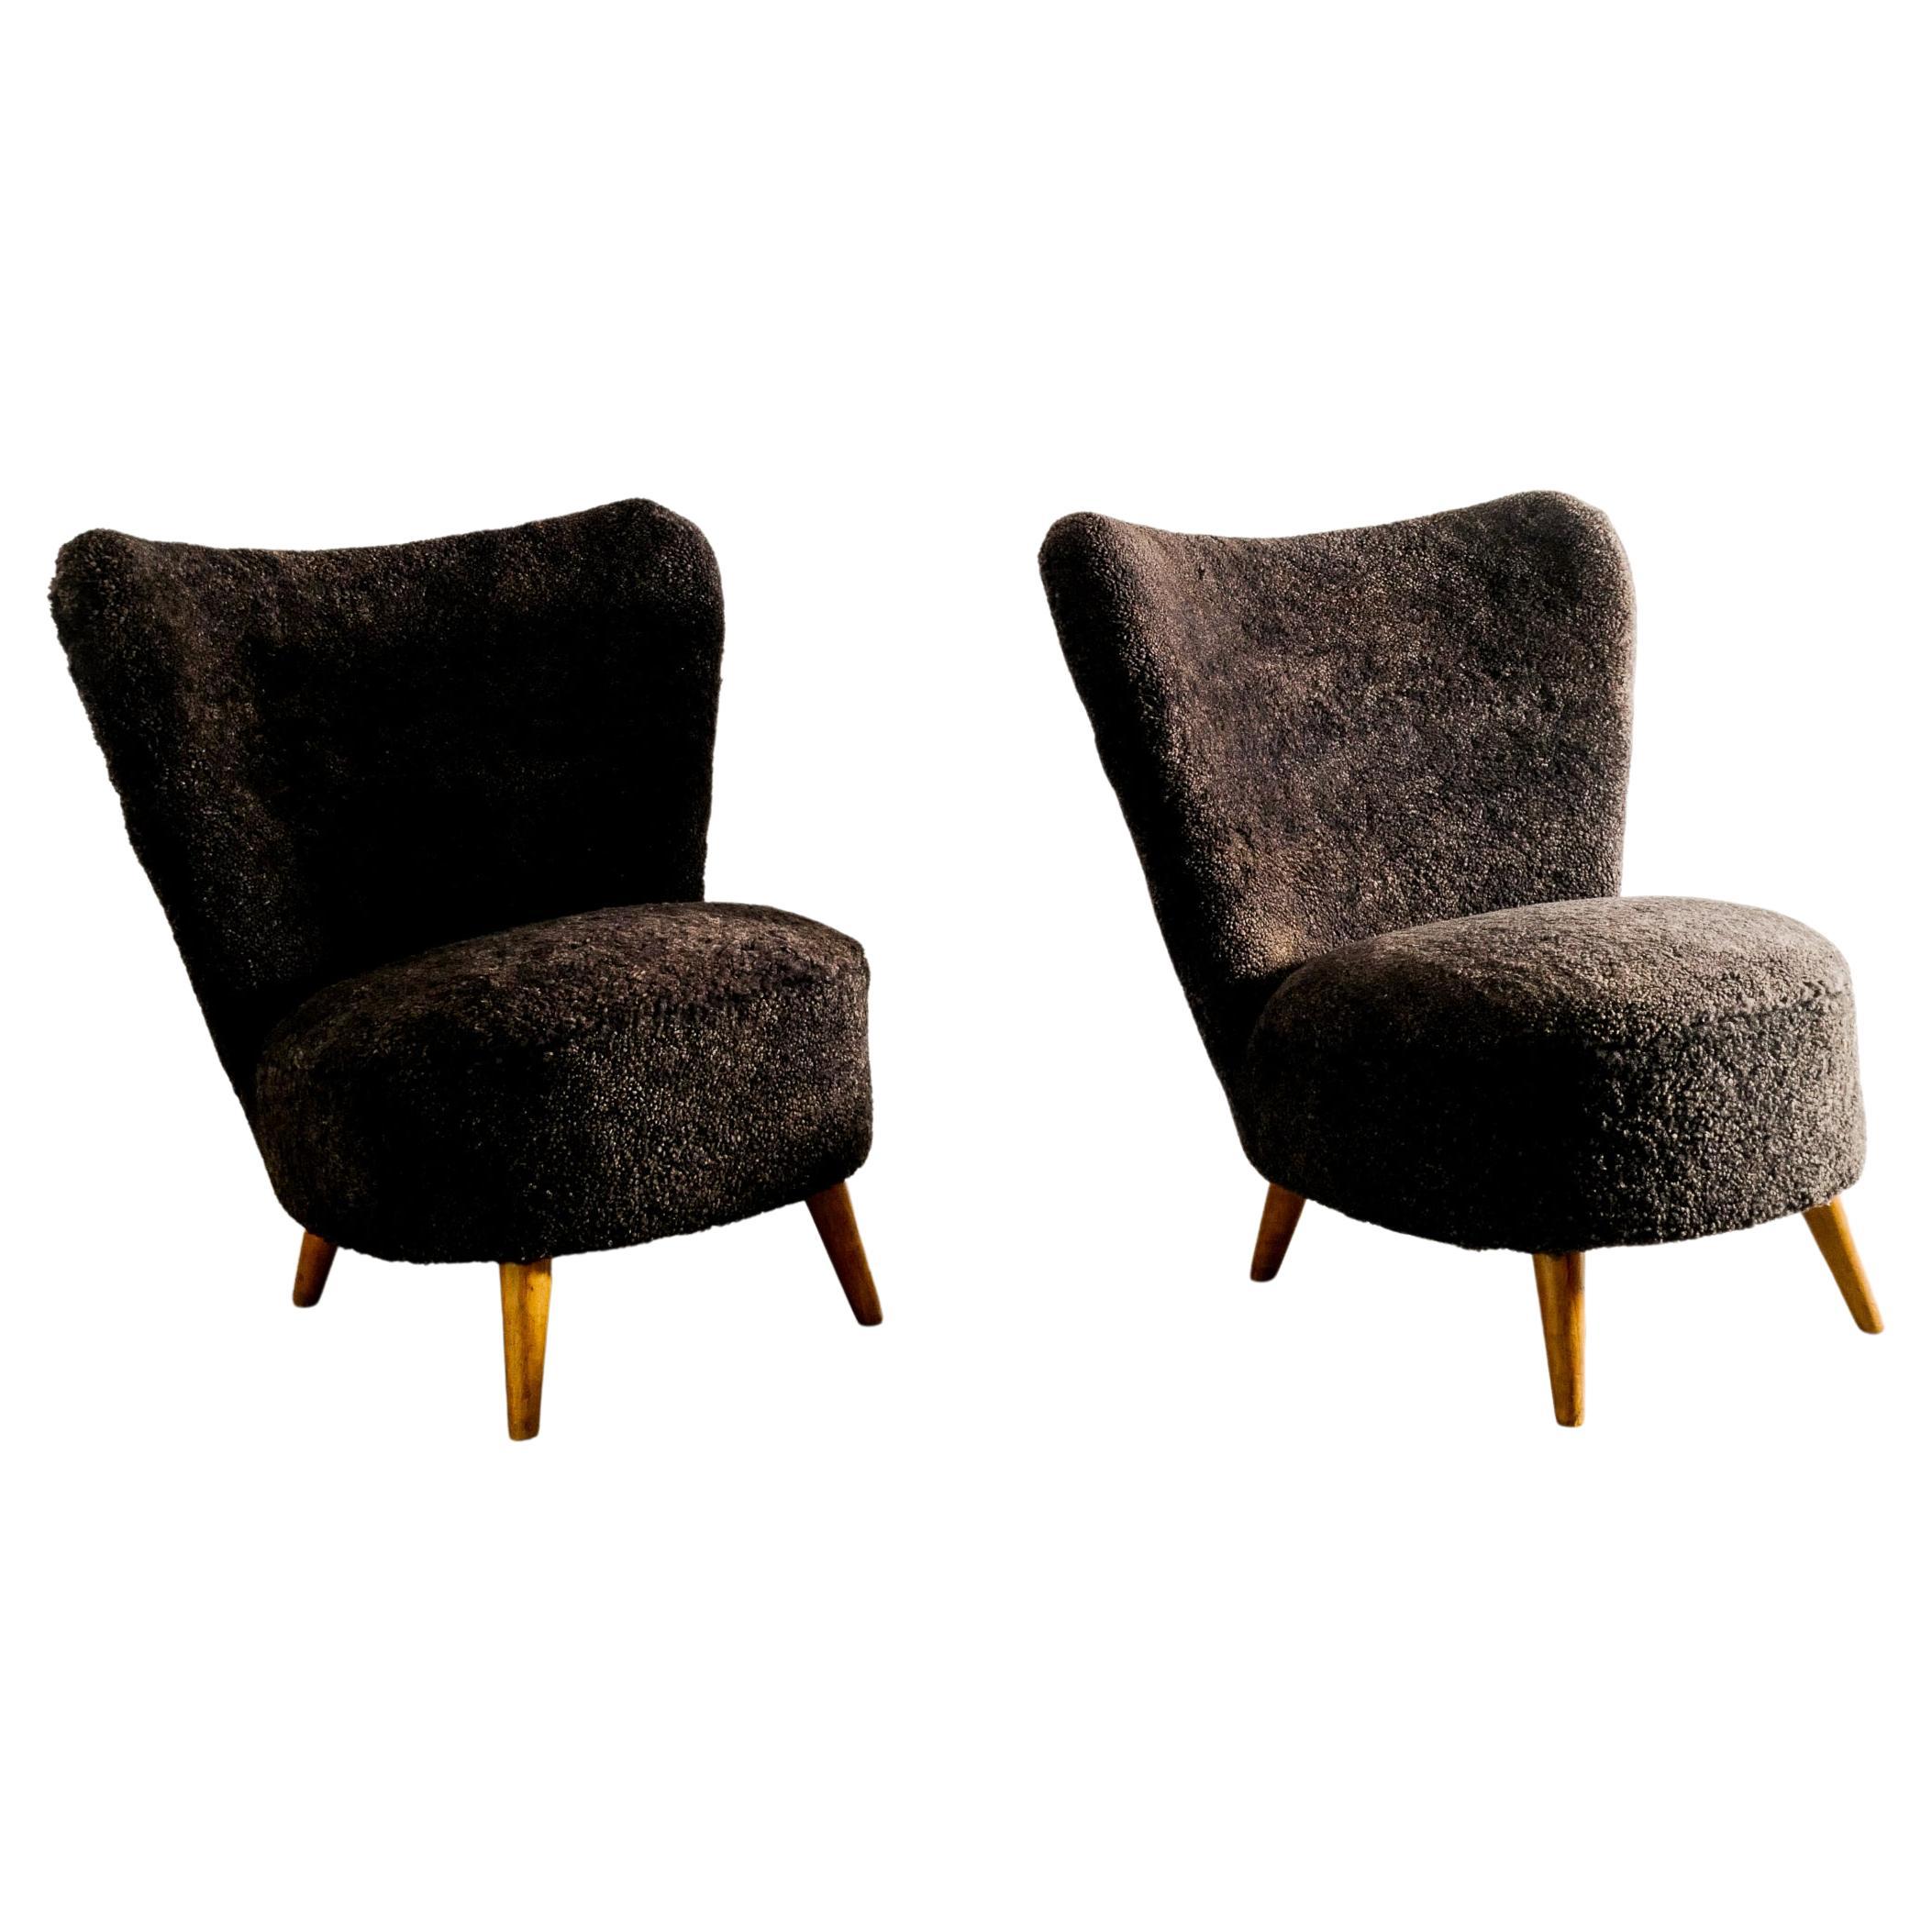 Pair of Swedish Easy Chairs Attr. to Gösta Jonsson Produced in Sweden, 1940s For Sale